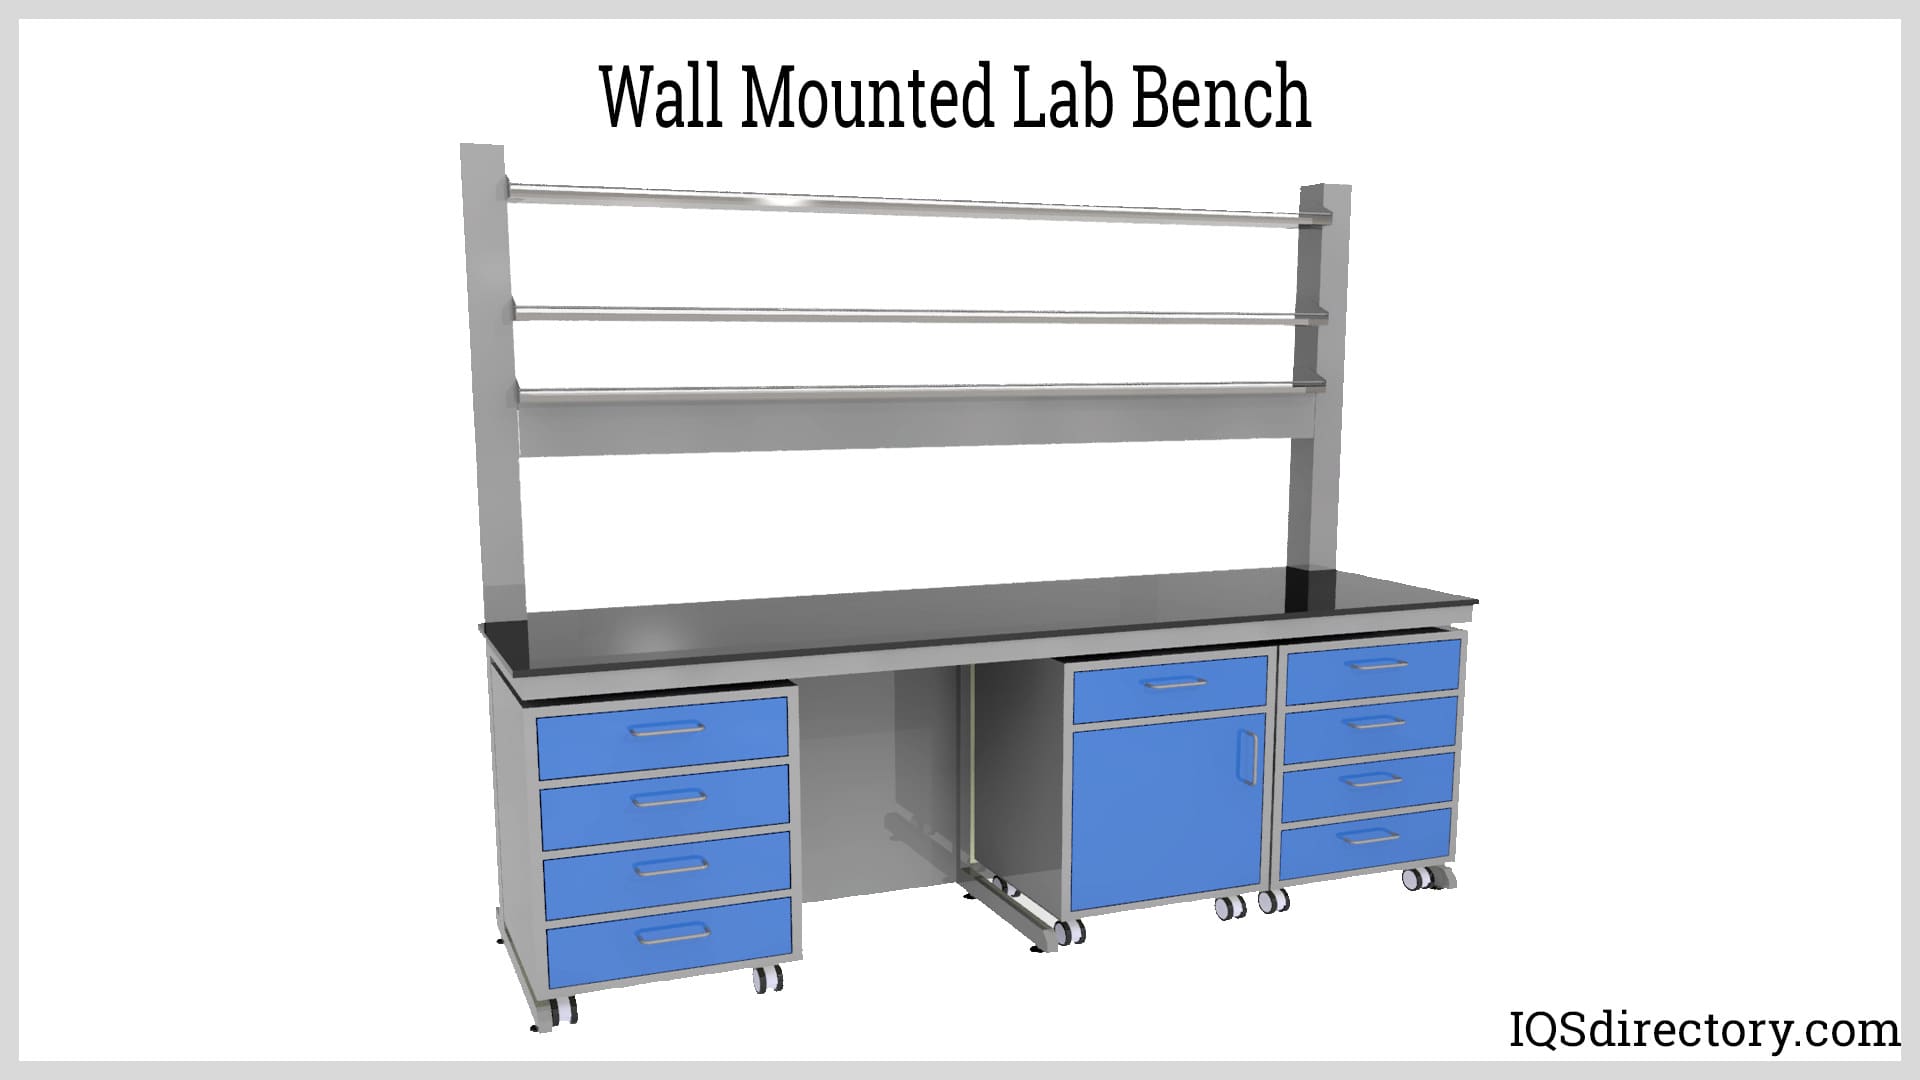 Wall Mounted Lab Bench